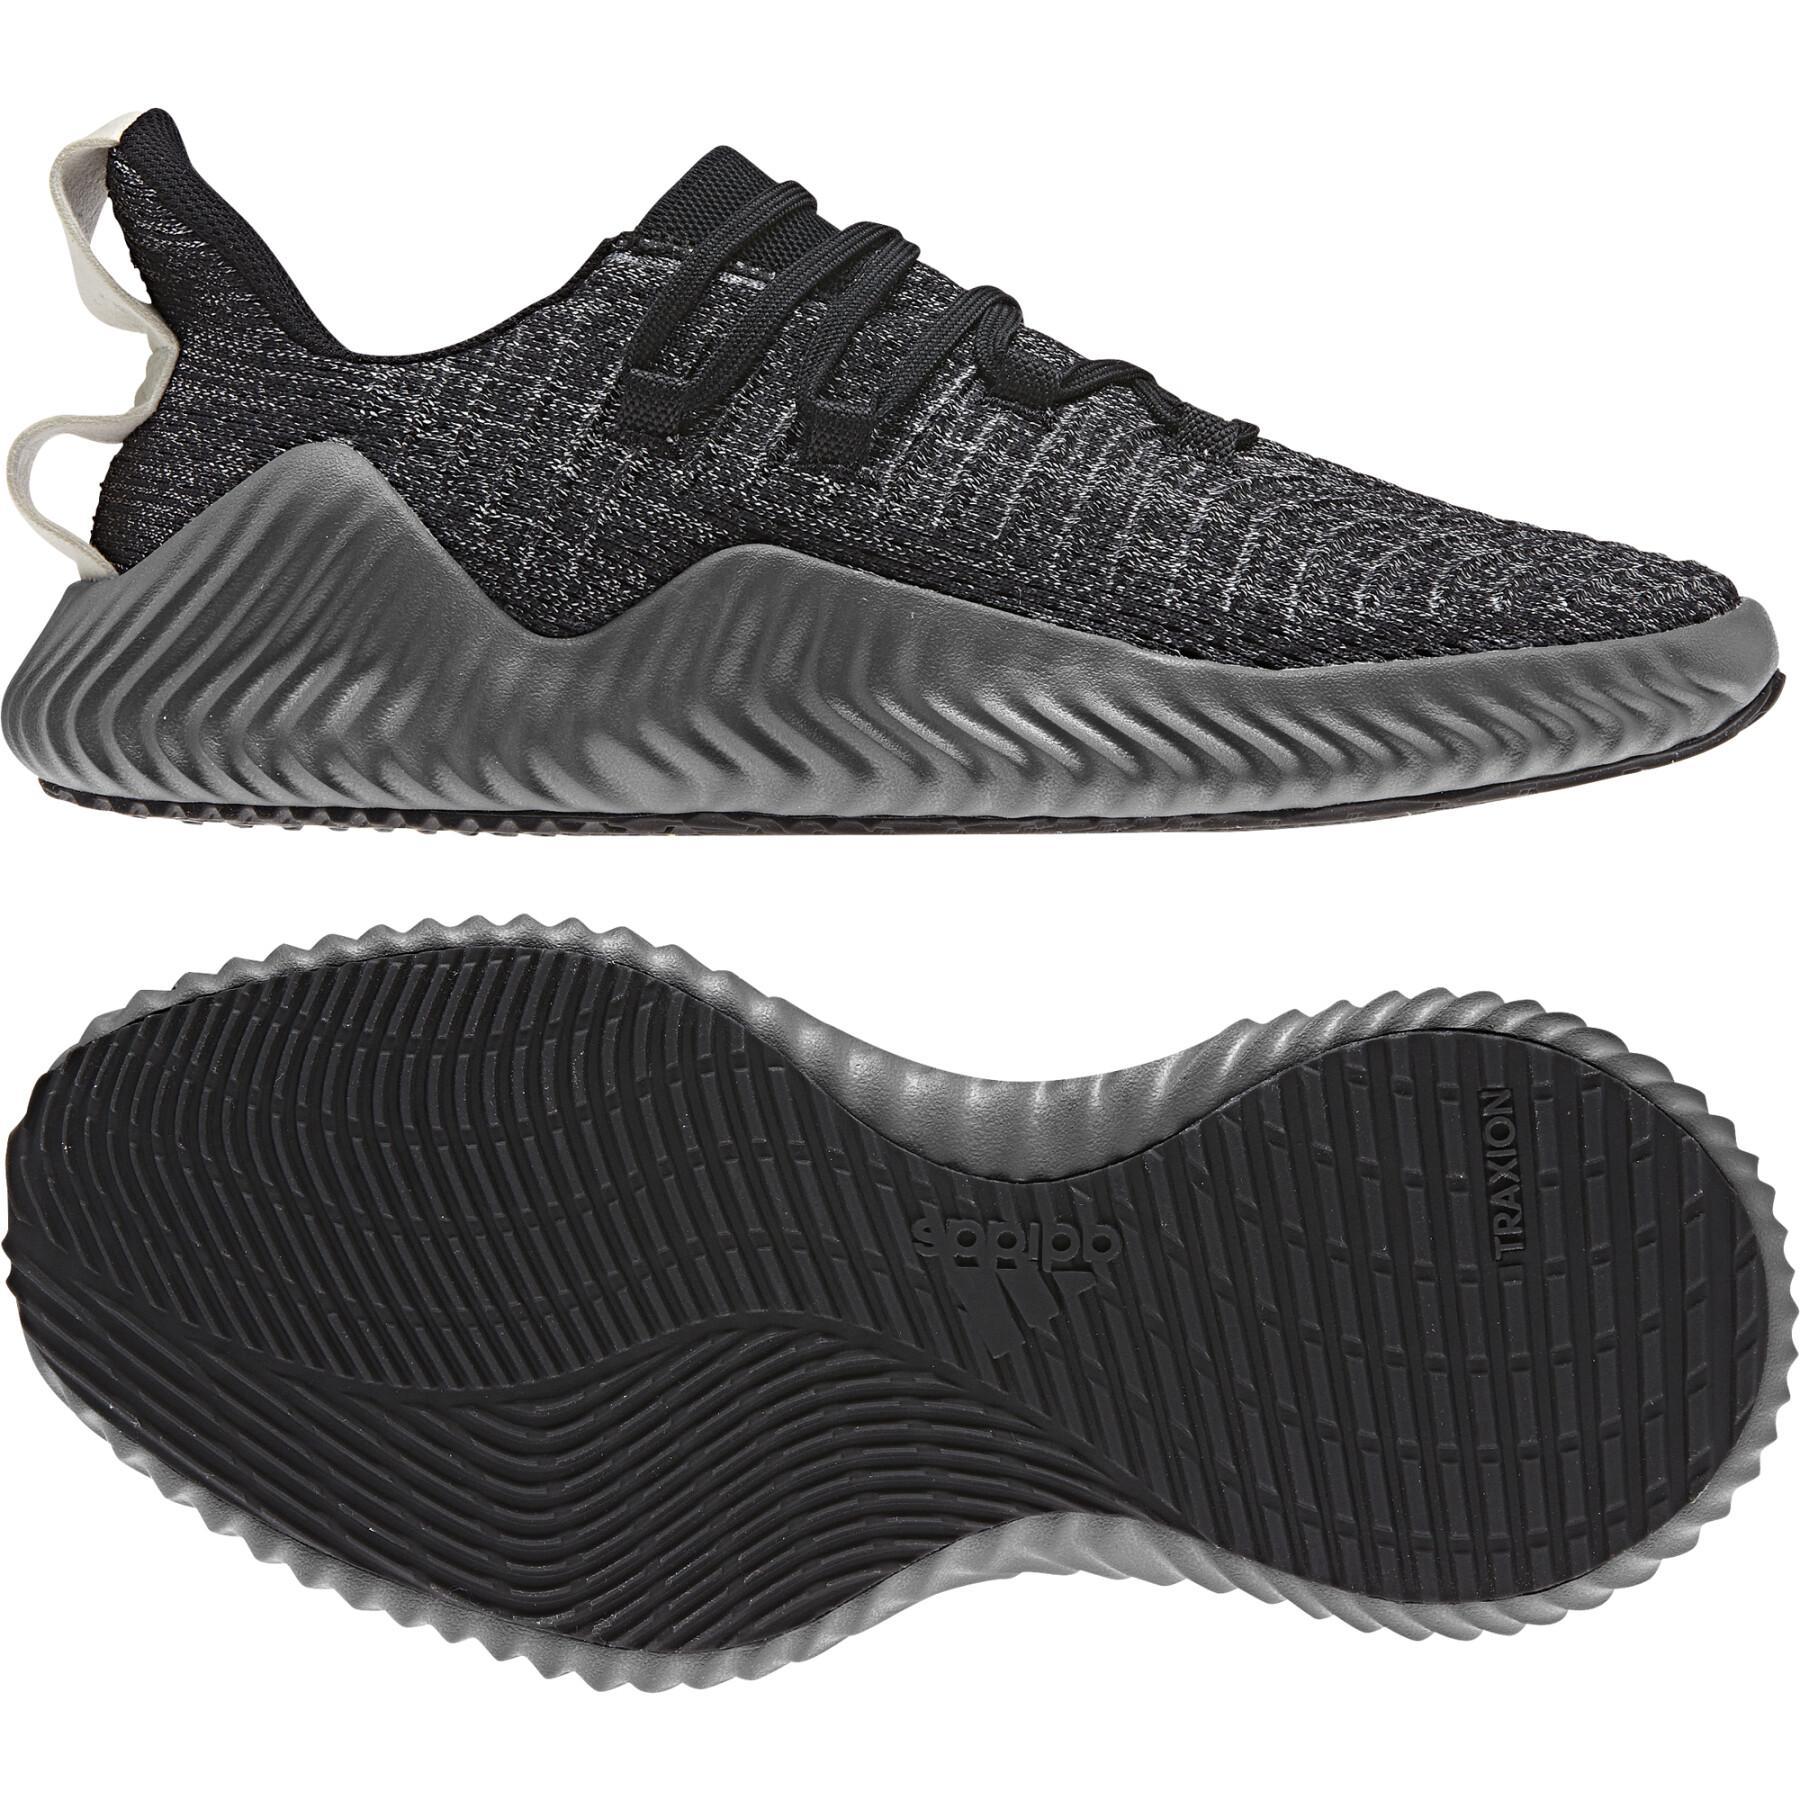 Shoes adidas Alphabounce